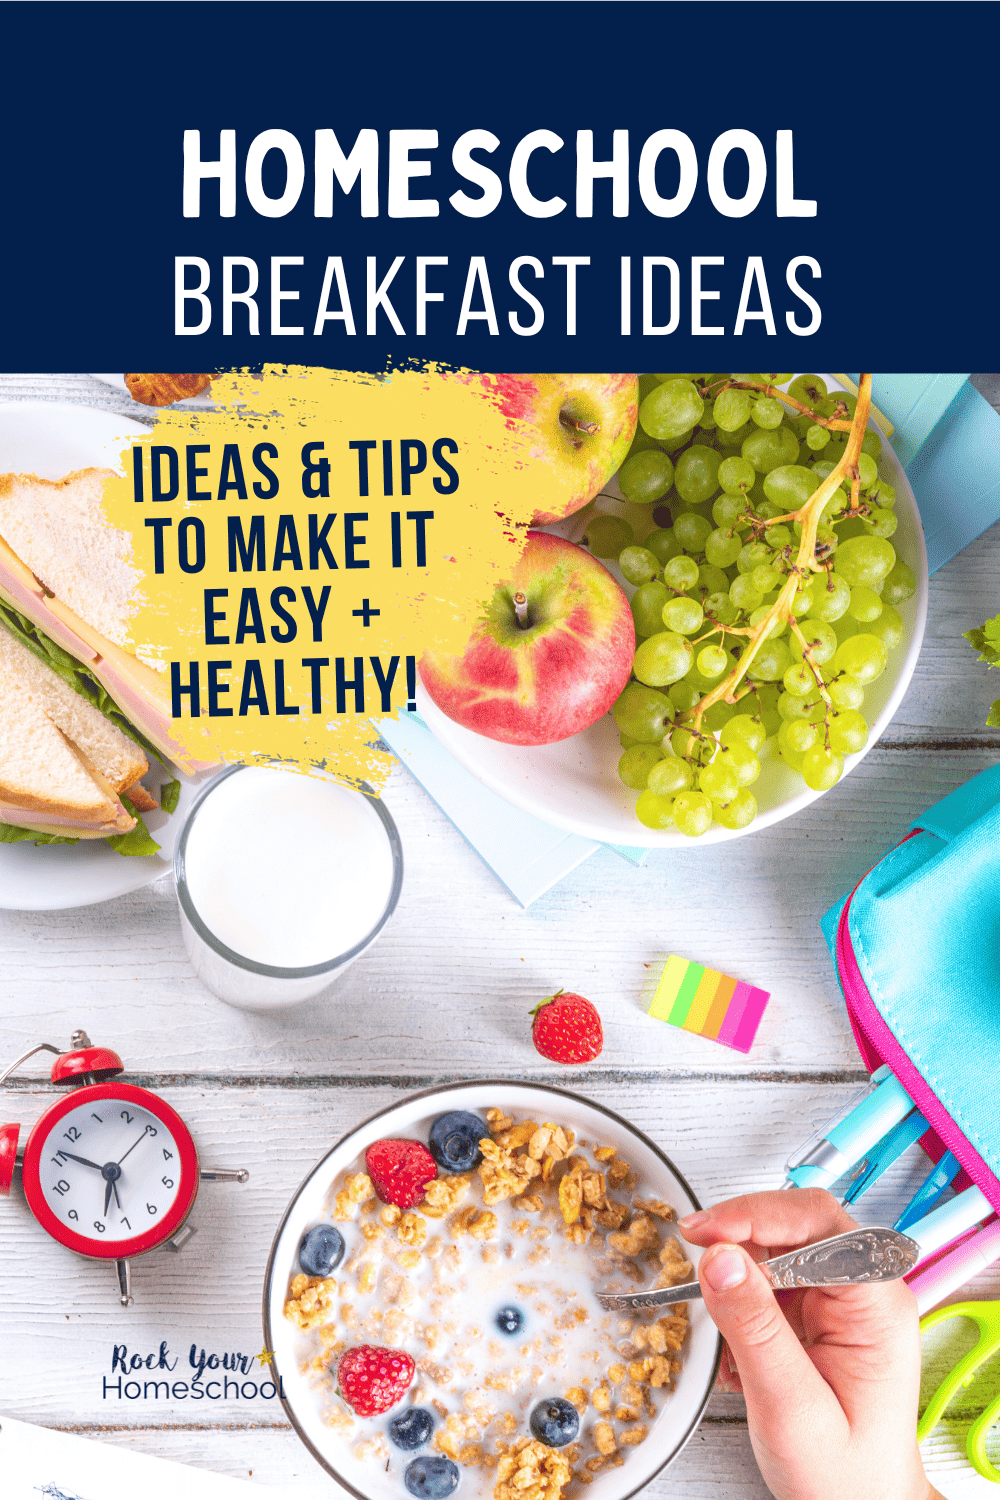 Homeschool Breakfast Ideas: How to Start Your Day Right